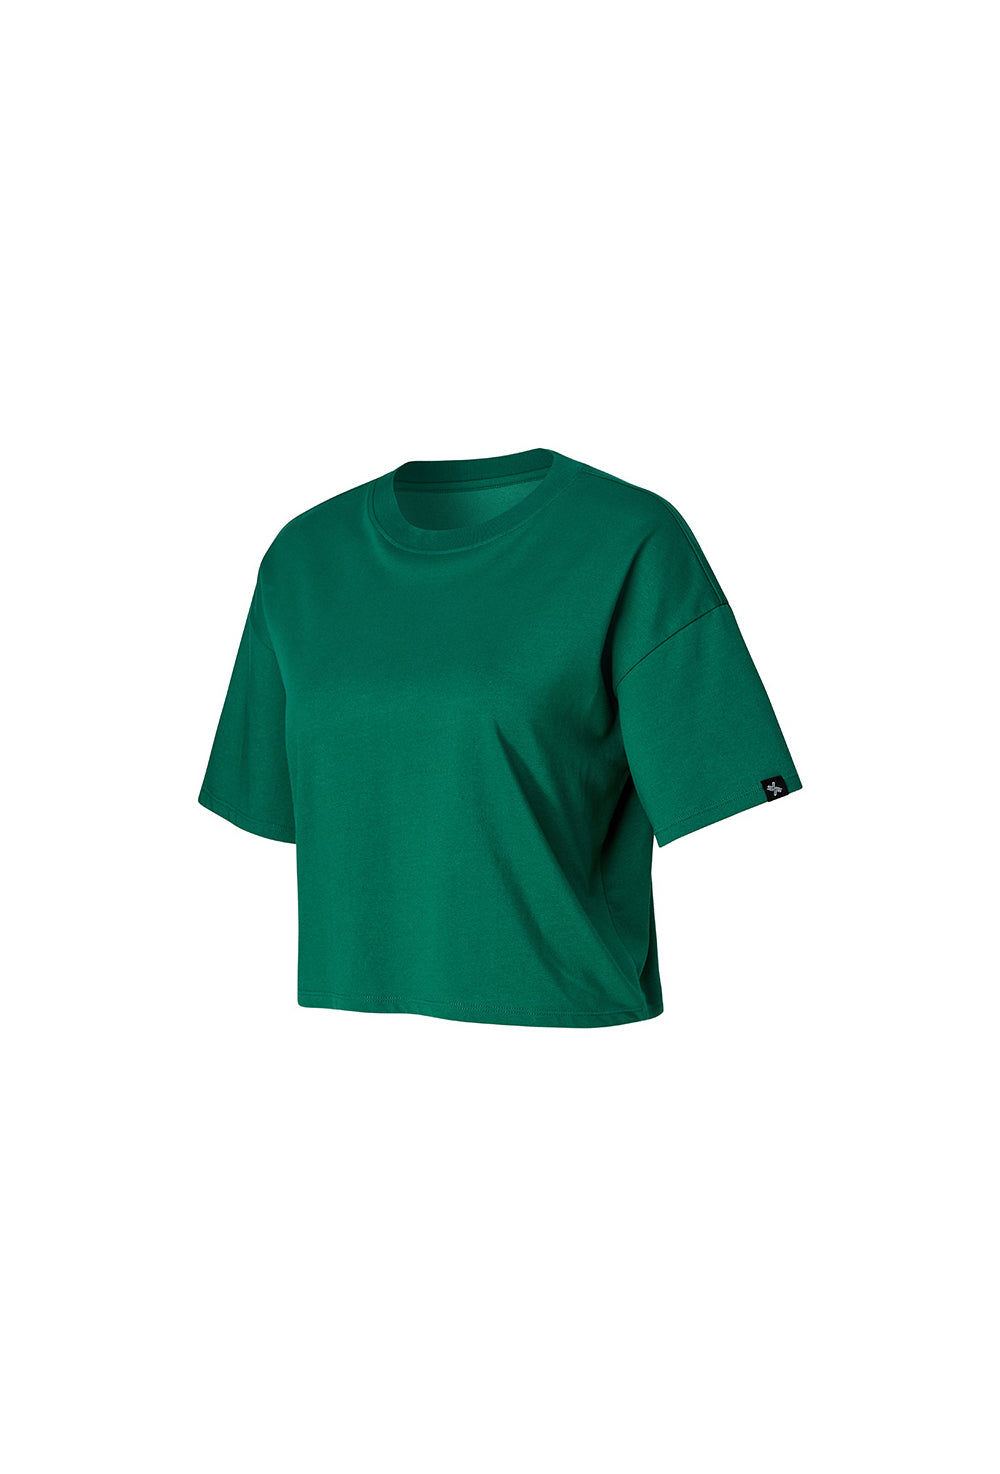 Cool Touch Basic Crop T-Shirt - Earth Green (Clearance)